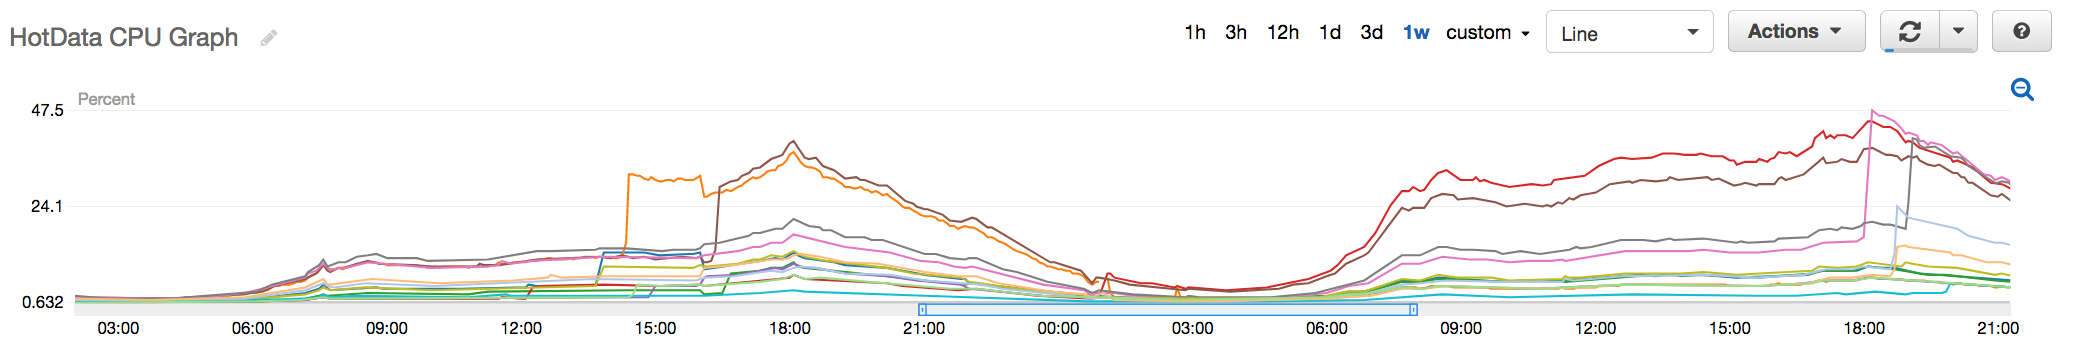 Fig 5. Old Hot Data Redis Cluster with CPU peaking at around 48%